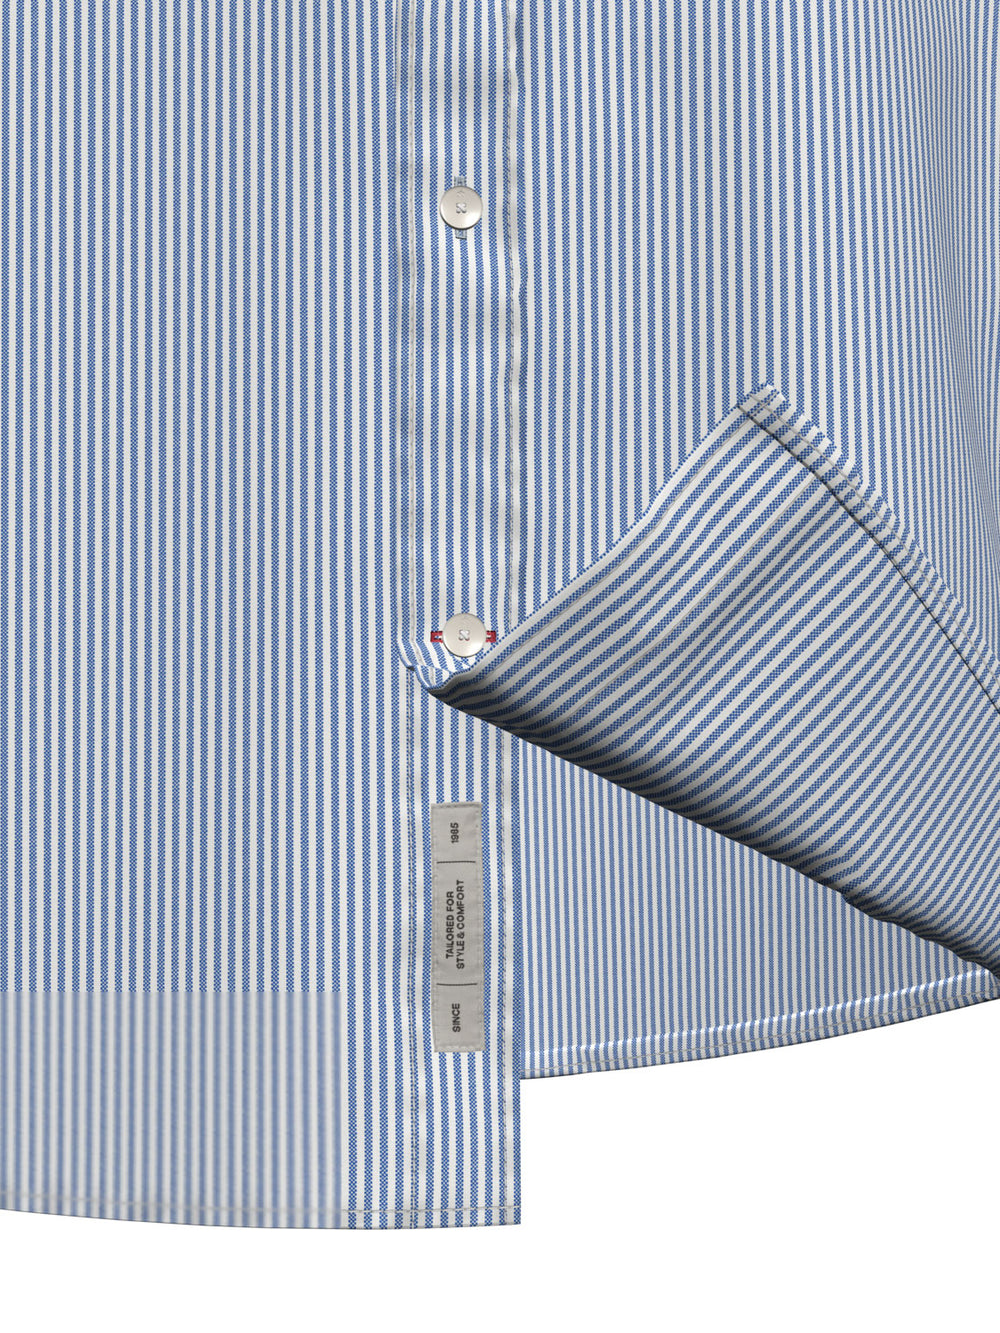 Essential Oxford Stripe Shirt in Blue Stripe | Buster McGee